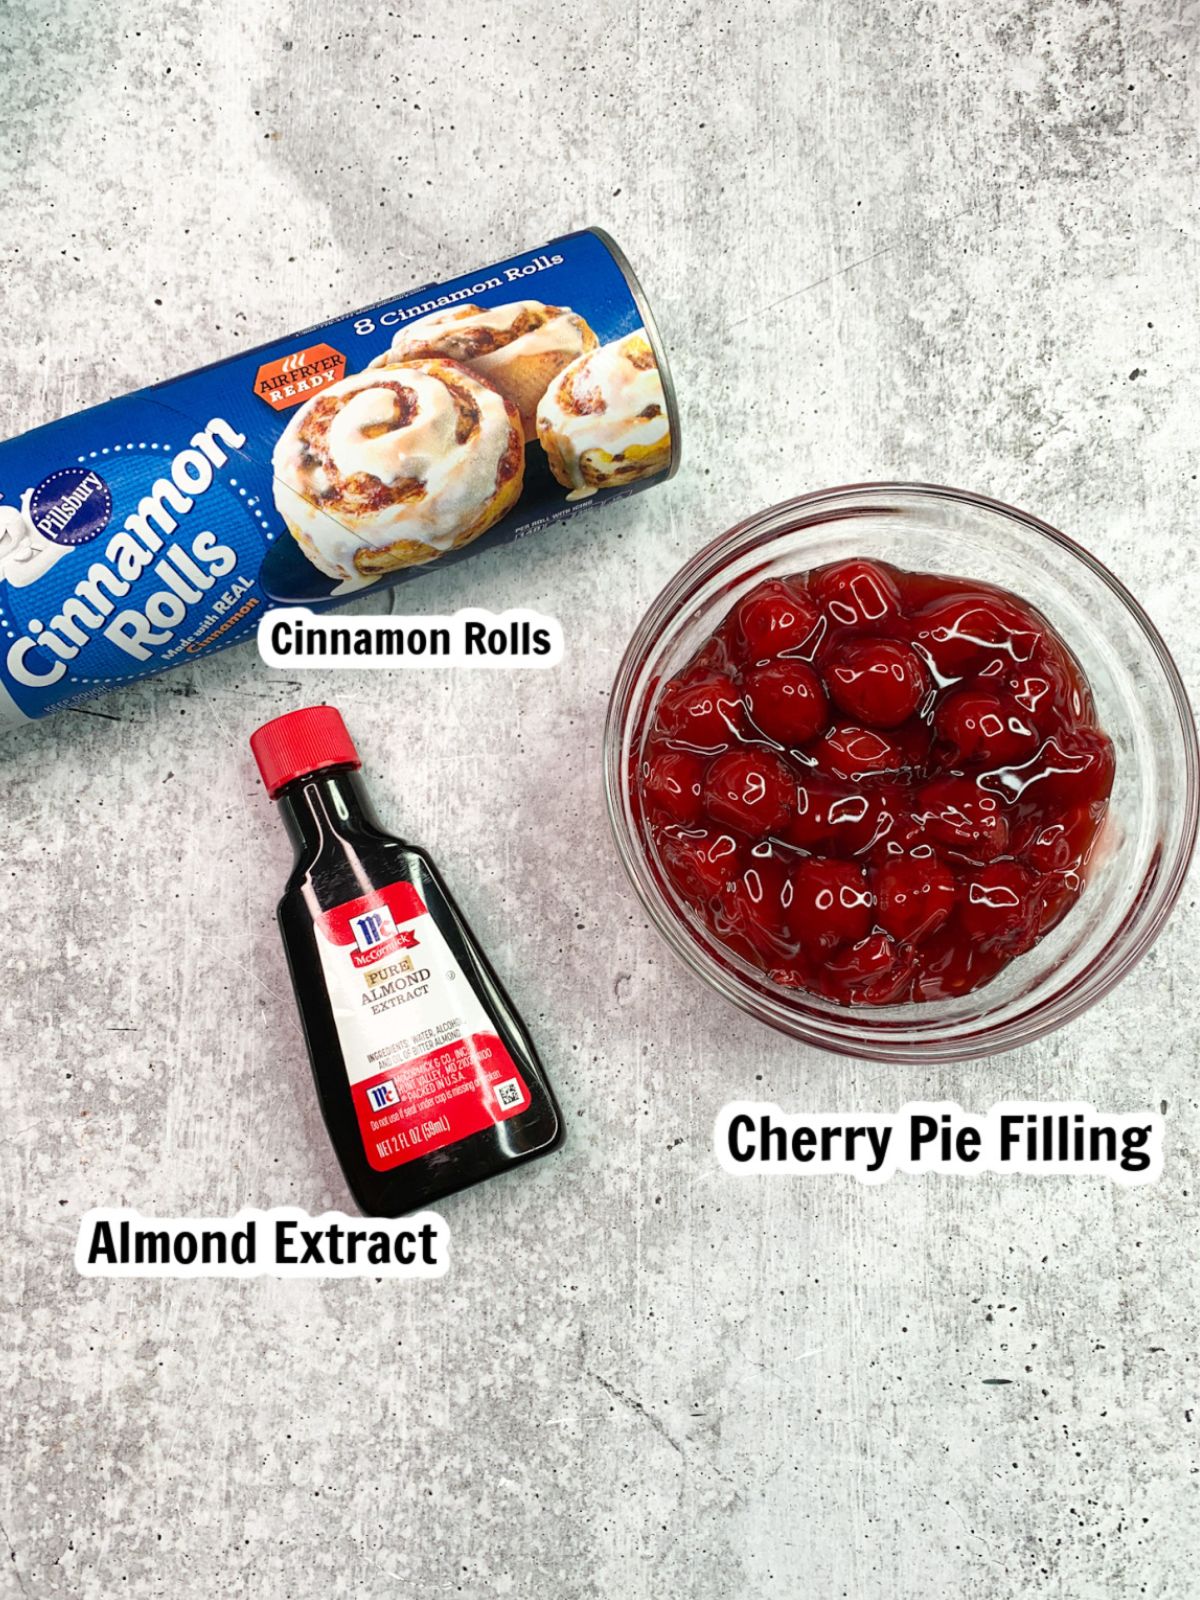 Ingredients for Cinnamon rolls and Cherry pie filling.